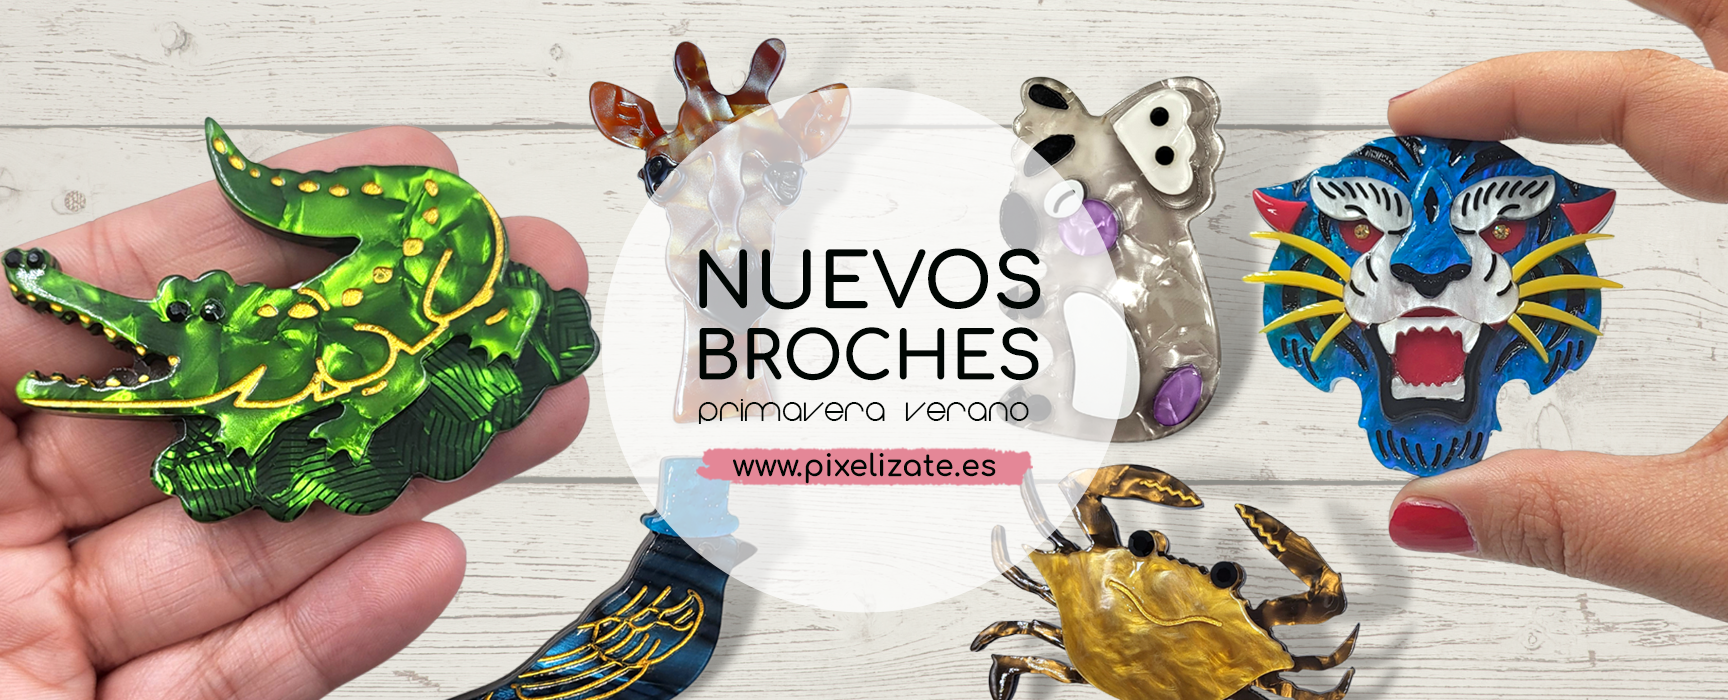 Broches22Pixelizate22.png